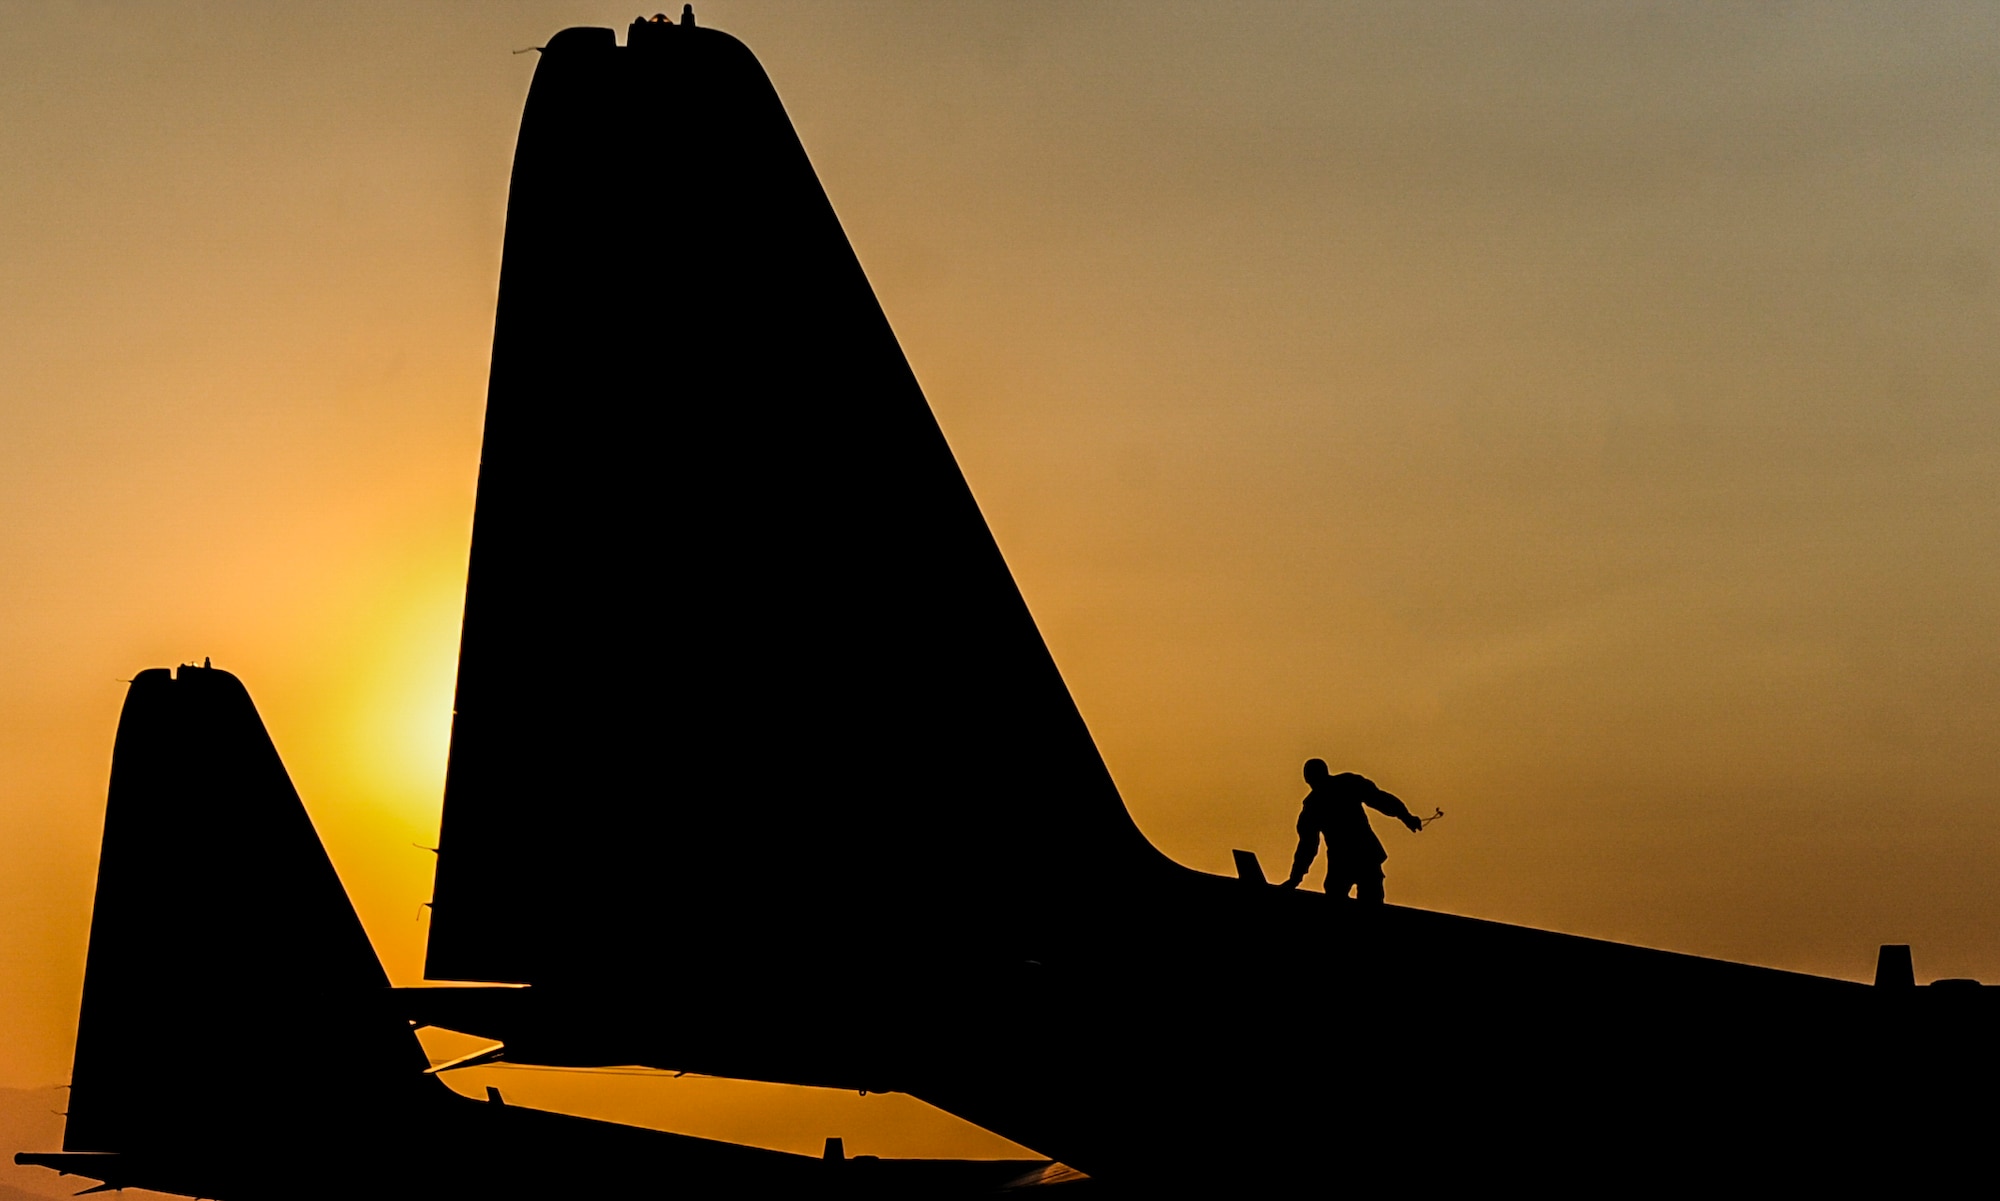 An Airman assigned to the 71st Rescue Squadron, Moody Air Force Base, Georgia, walks on top of an HC-130J Combat King II before Red Flag 16-4 night operations at Nellis Air Force Base, Nev., Aug. 25, 2016. Red Flag provides an opportunity for aircrew and military aircraft the ability to enhance their tactical operational skills alongside military aircraft from coalition forces. (U.S. Air Force photo by Airman 1st Class Kevin Tanenbaum/Released)